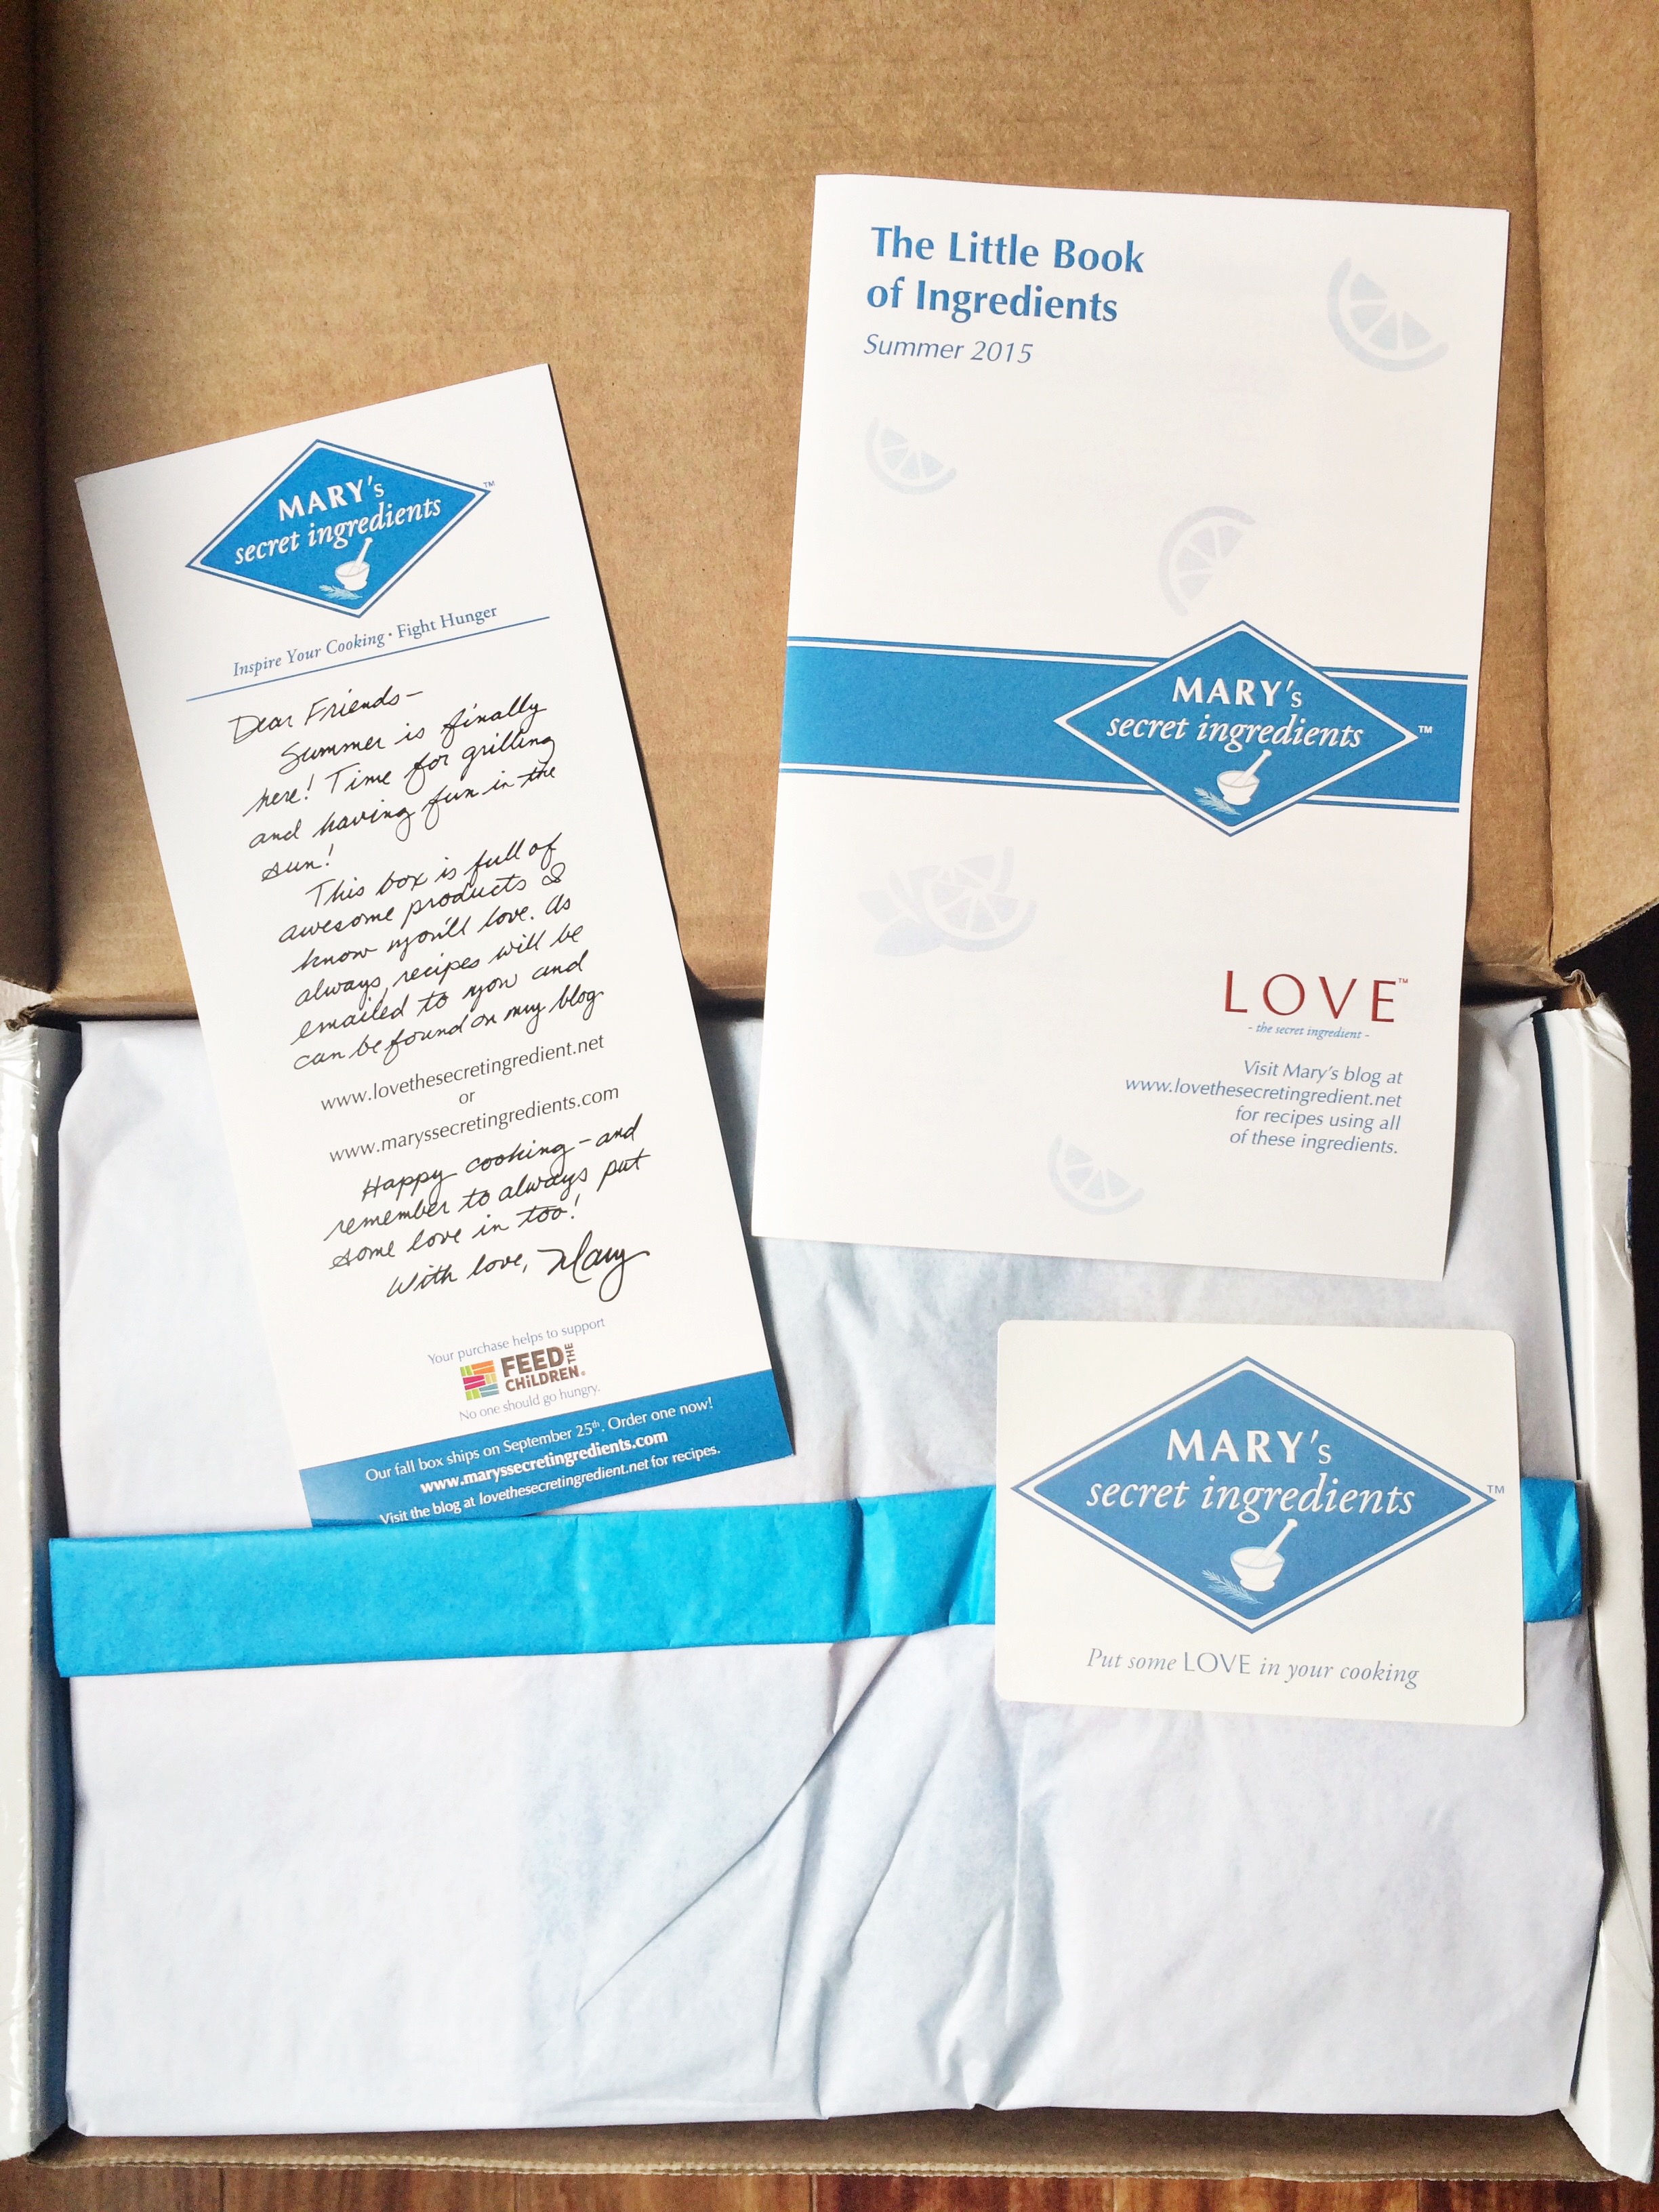 Mary's secret ingredients subscription box